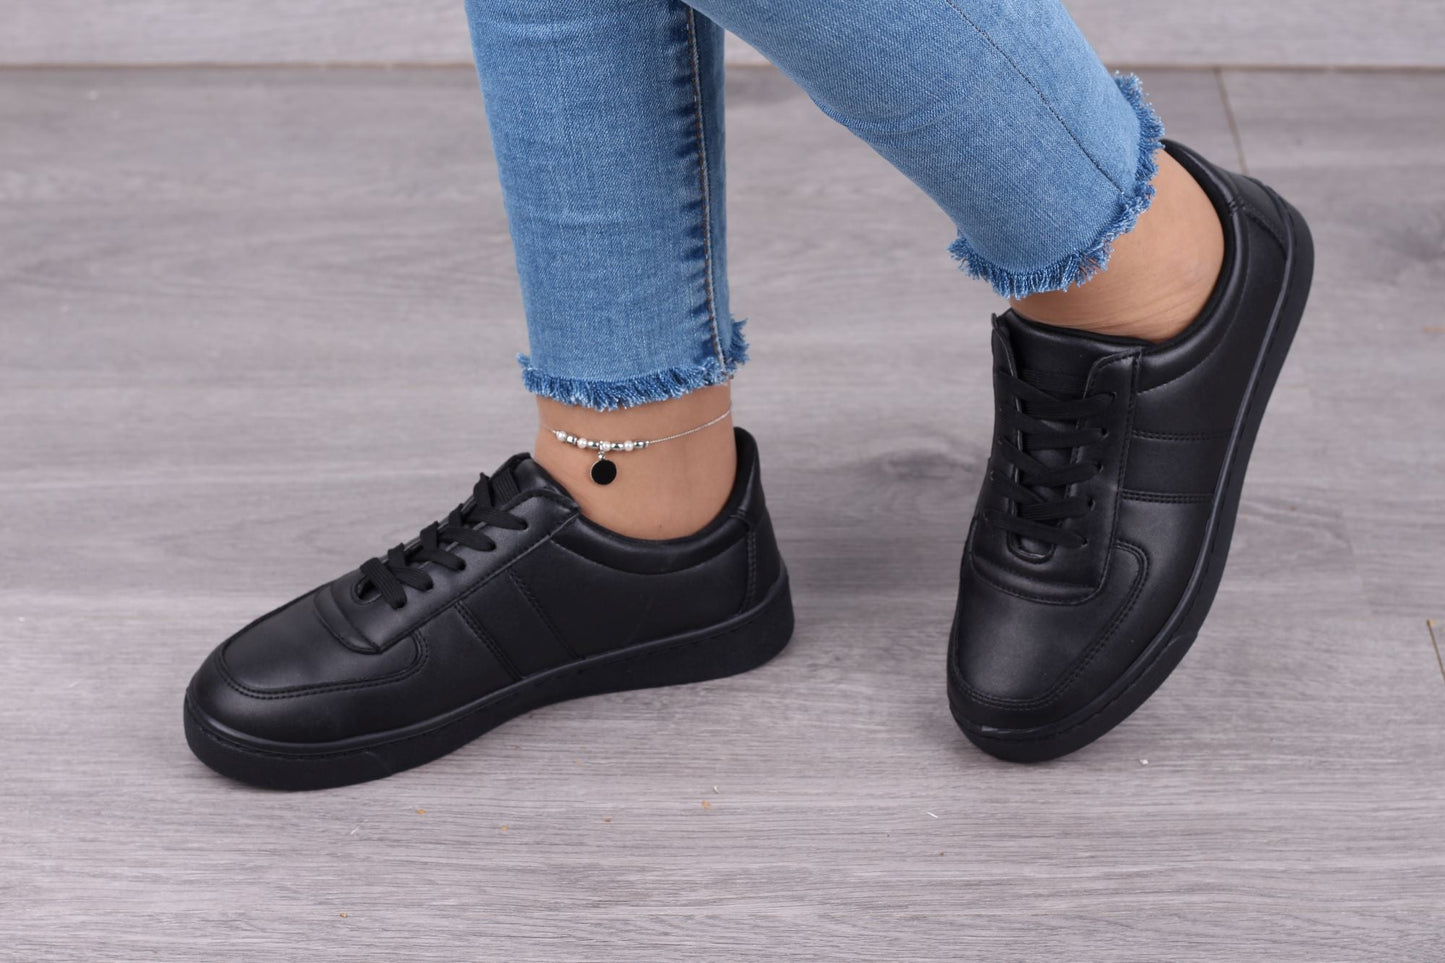 Buy now comfortable and padded black leather sneakers to be happier in your life